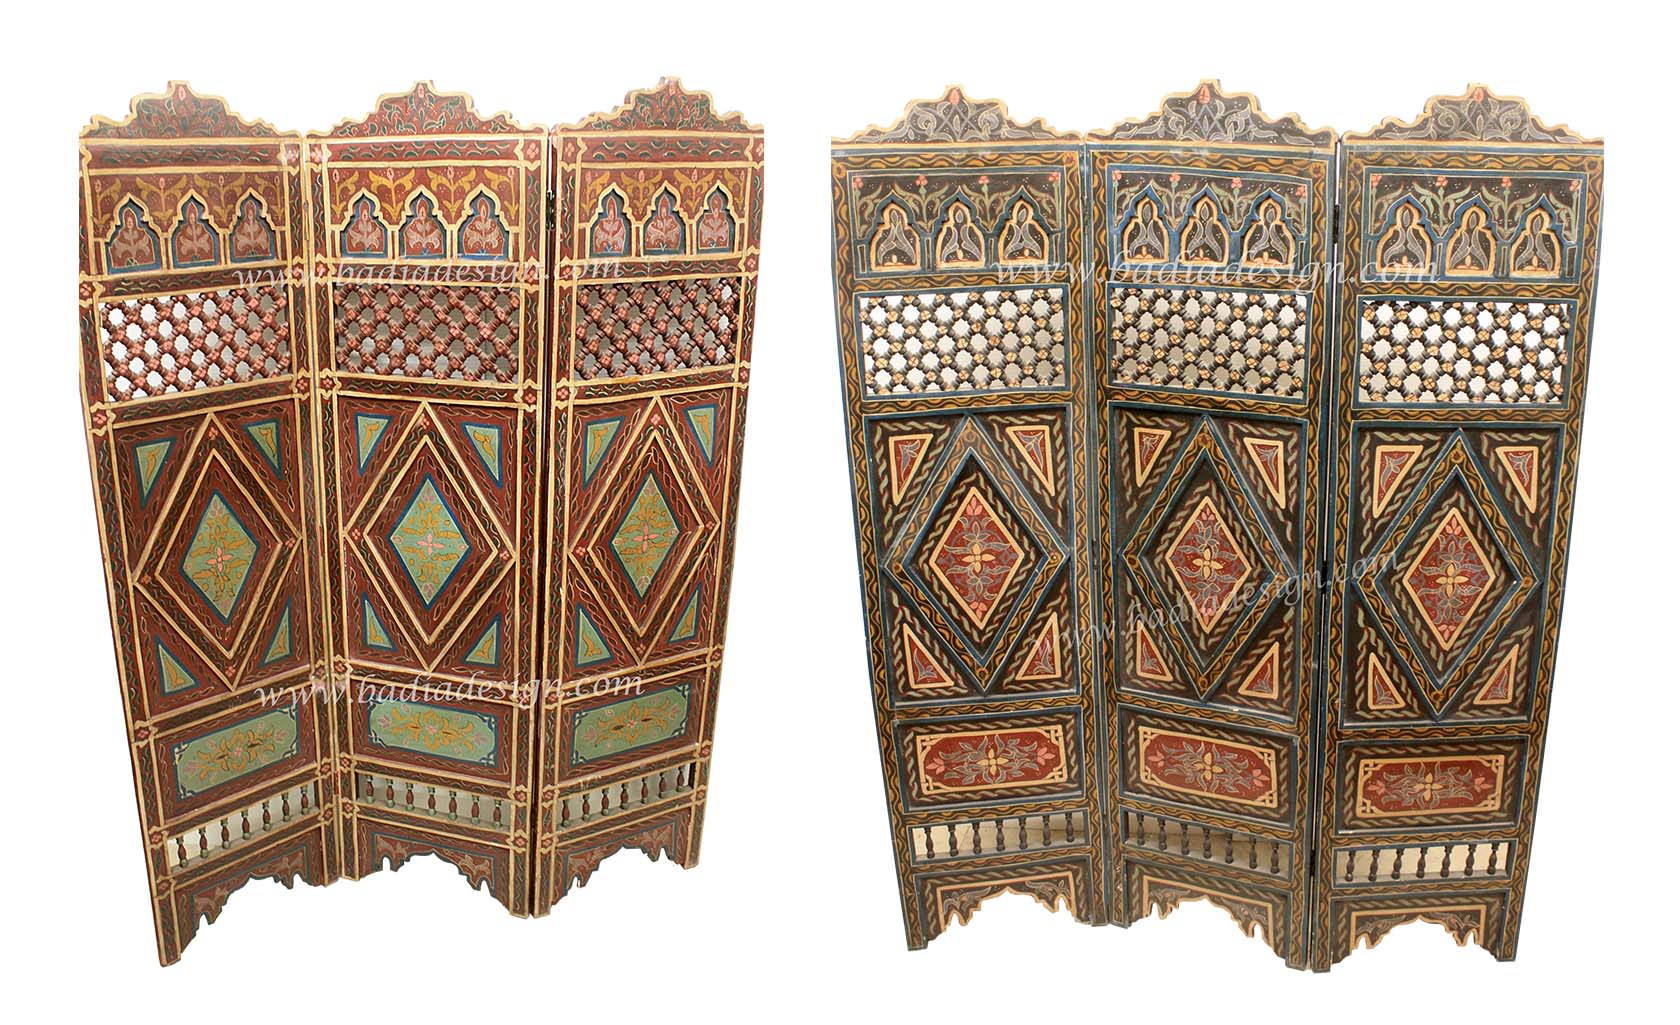 Moroccan Hand Painted Wooden Divider